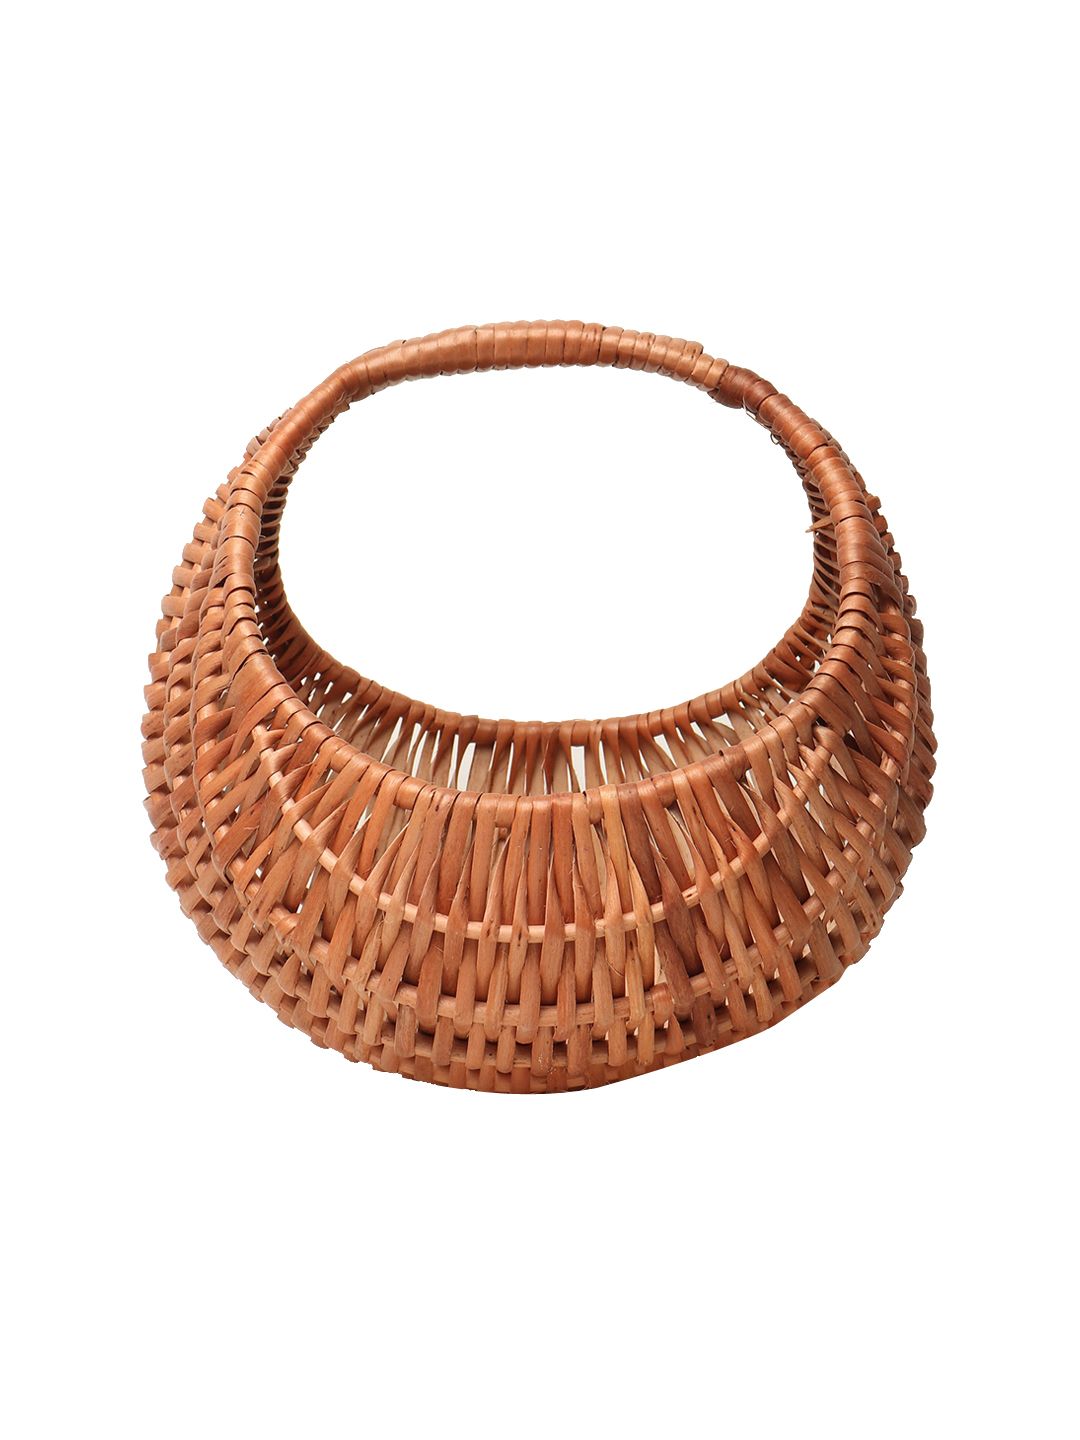 HABERE INDIA Brown Solid  Wicker Chand Basket Price in India